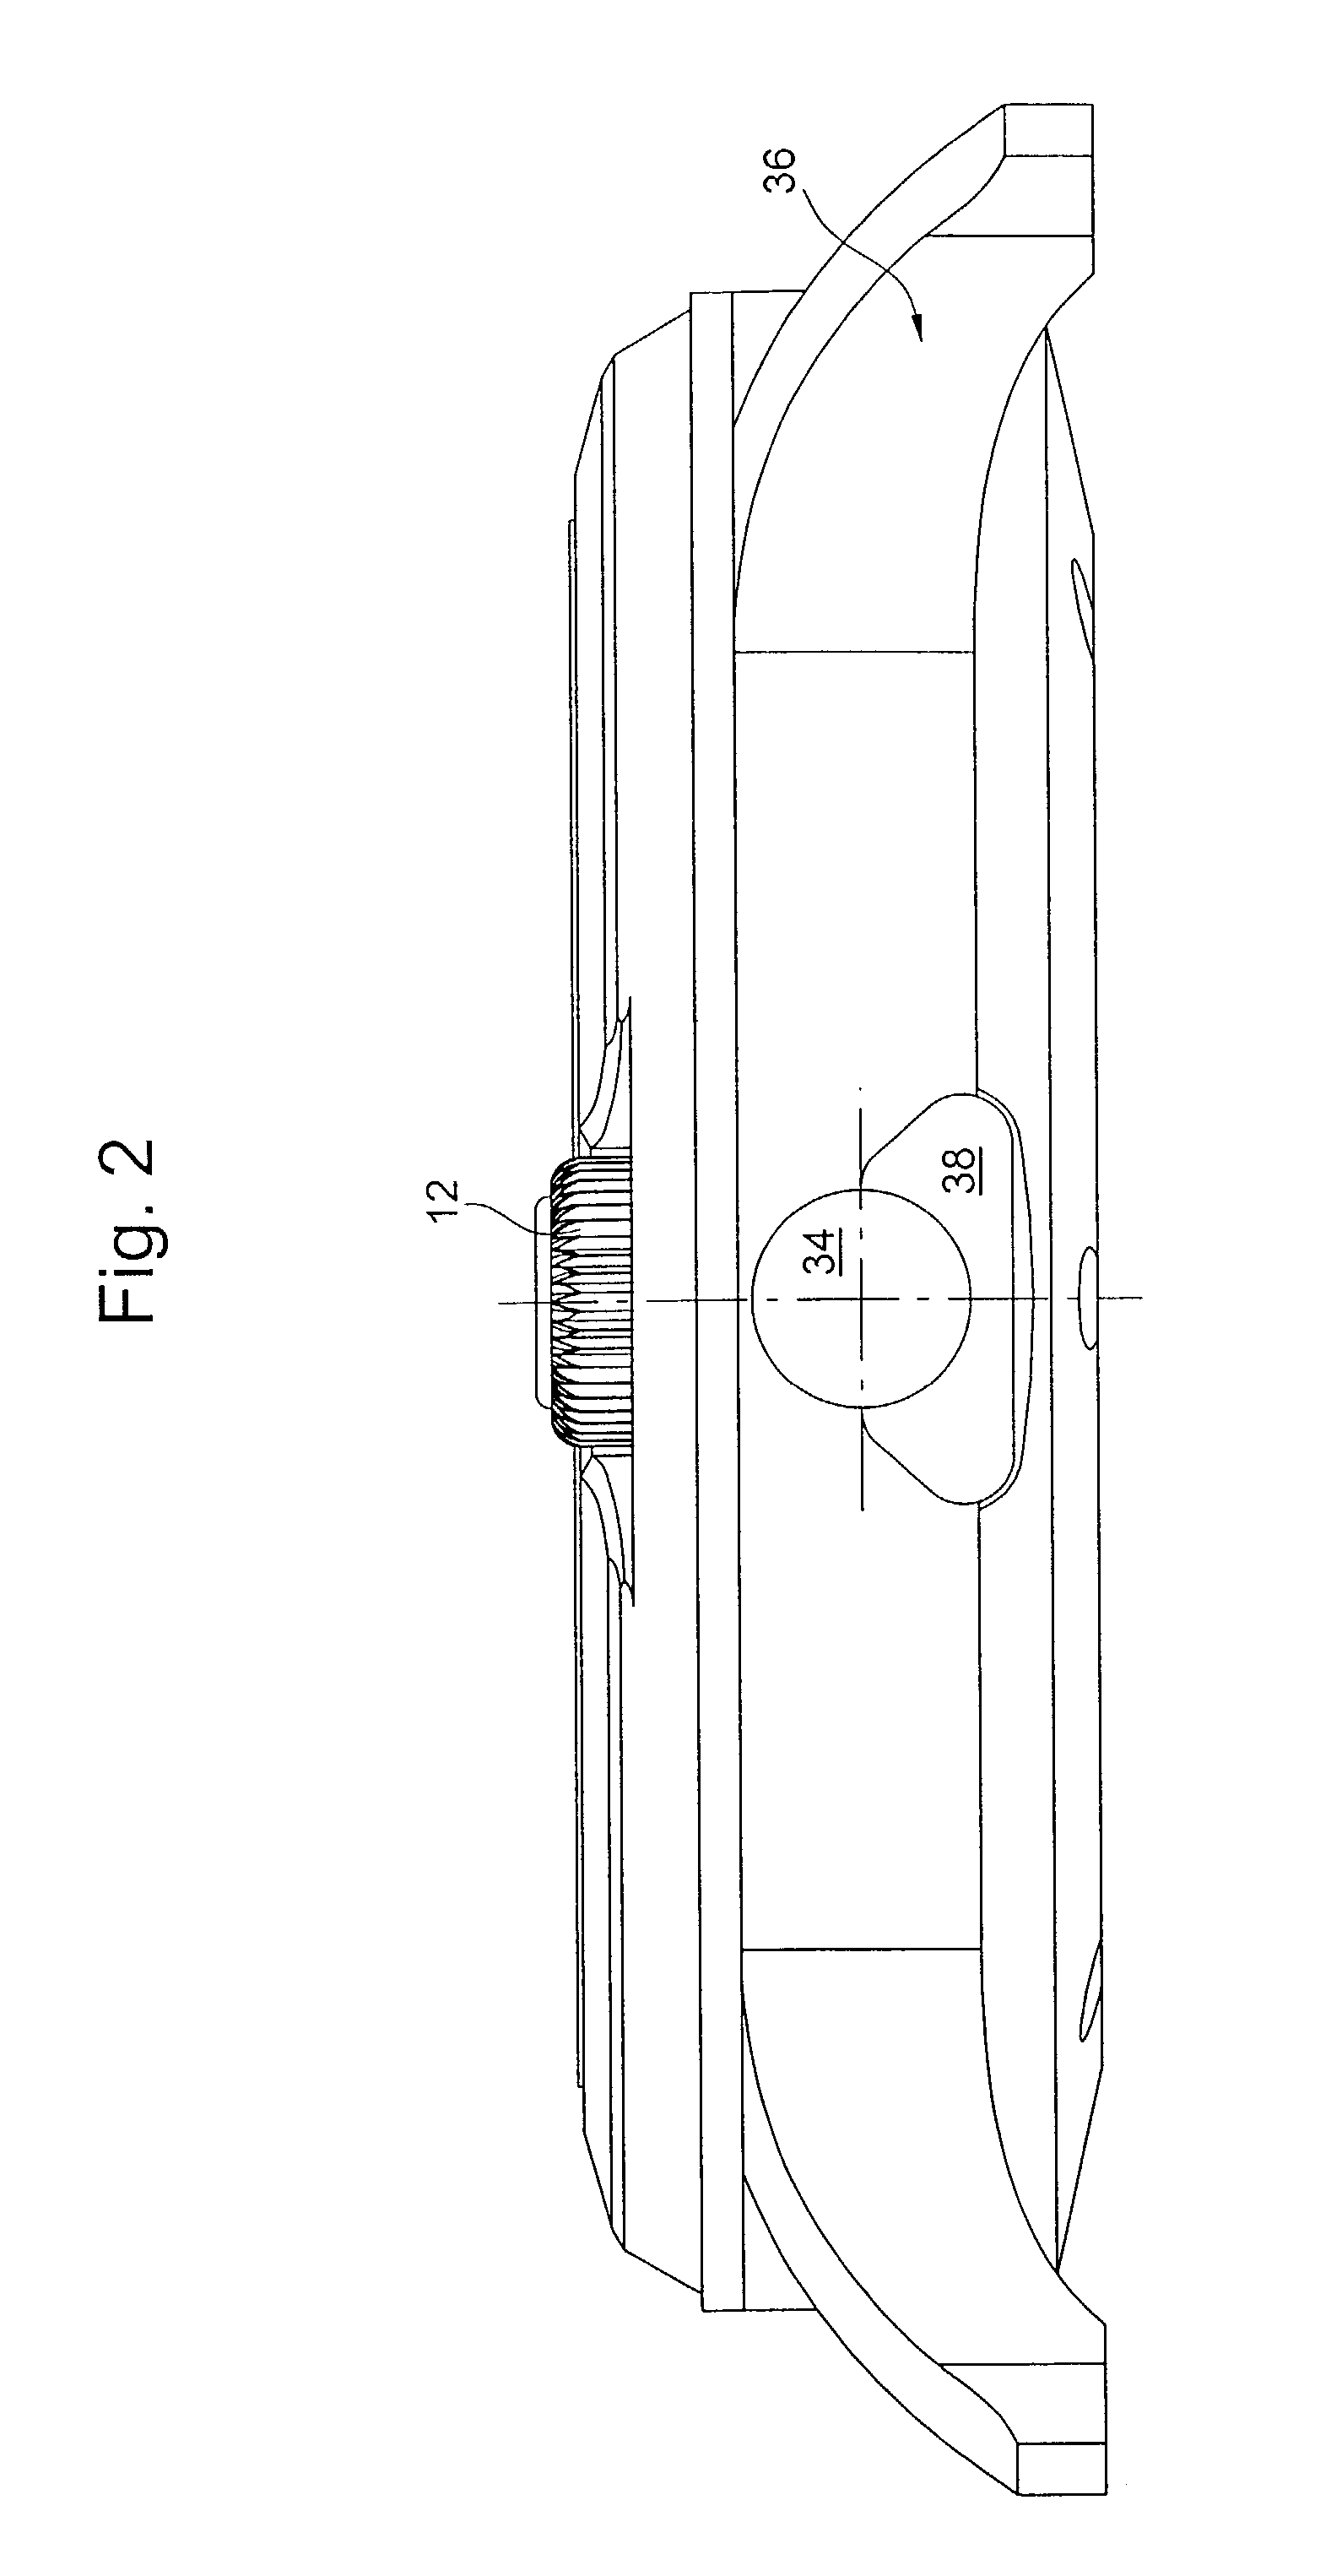 Device for winding and setting the time of a timepiece such as a date-watch including a date disc